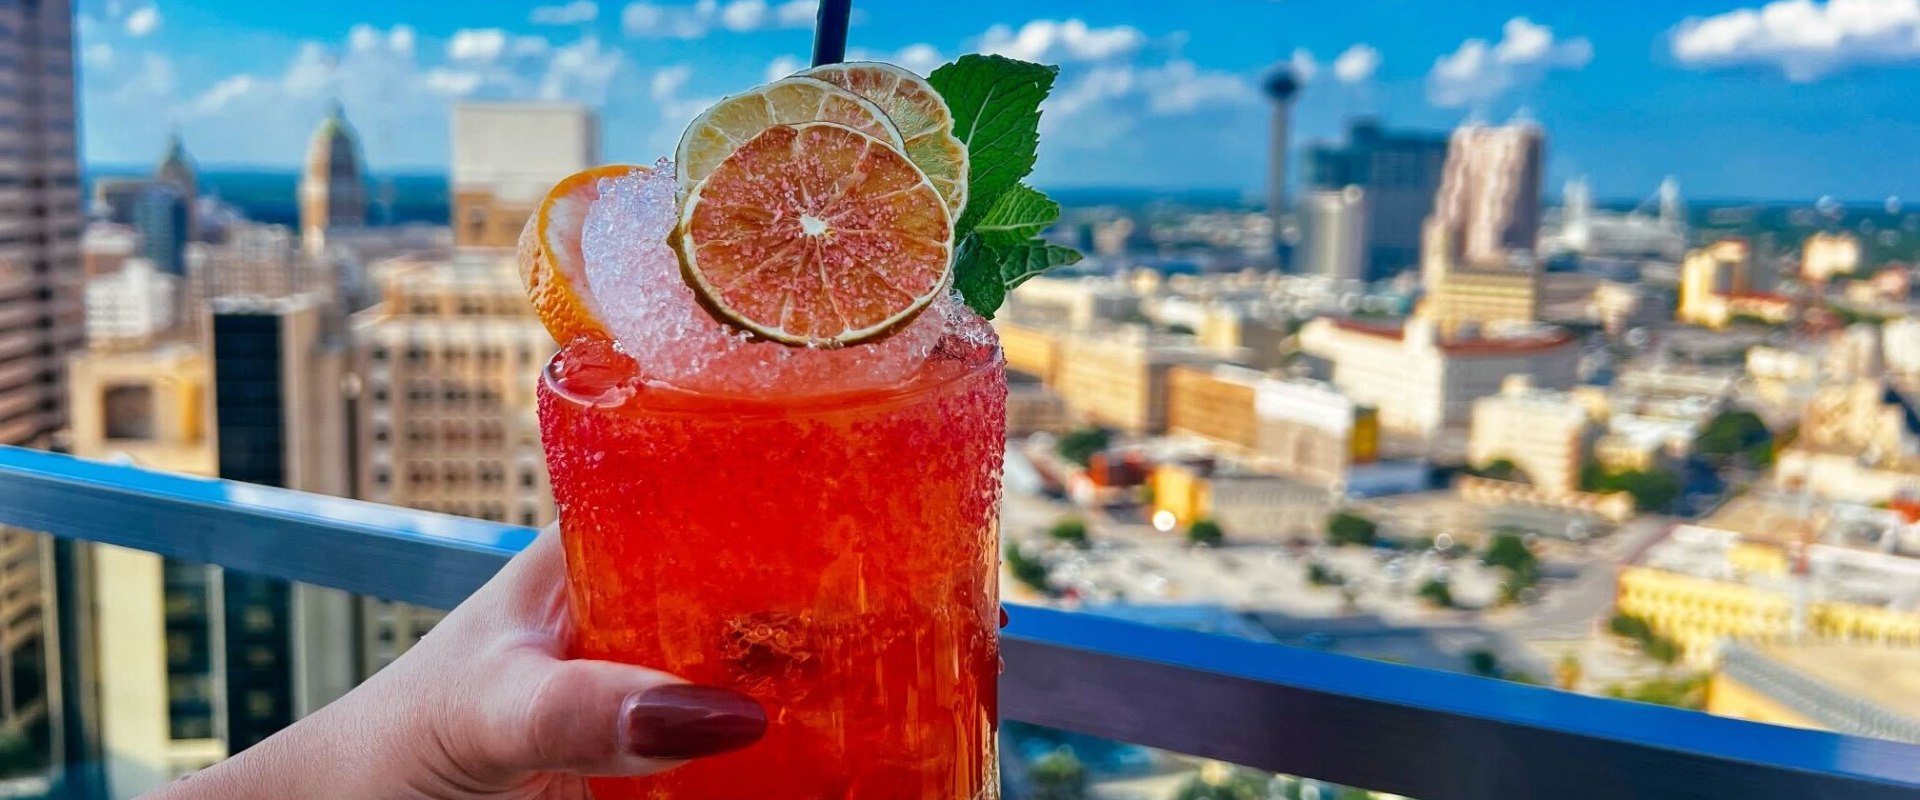 The Best Places to Unwind in San Antonio with a View